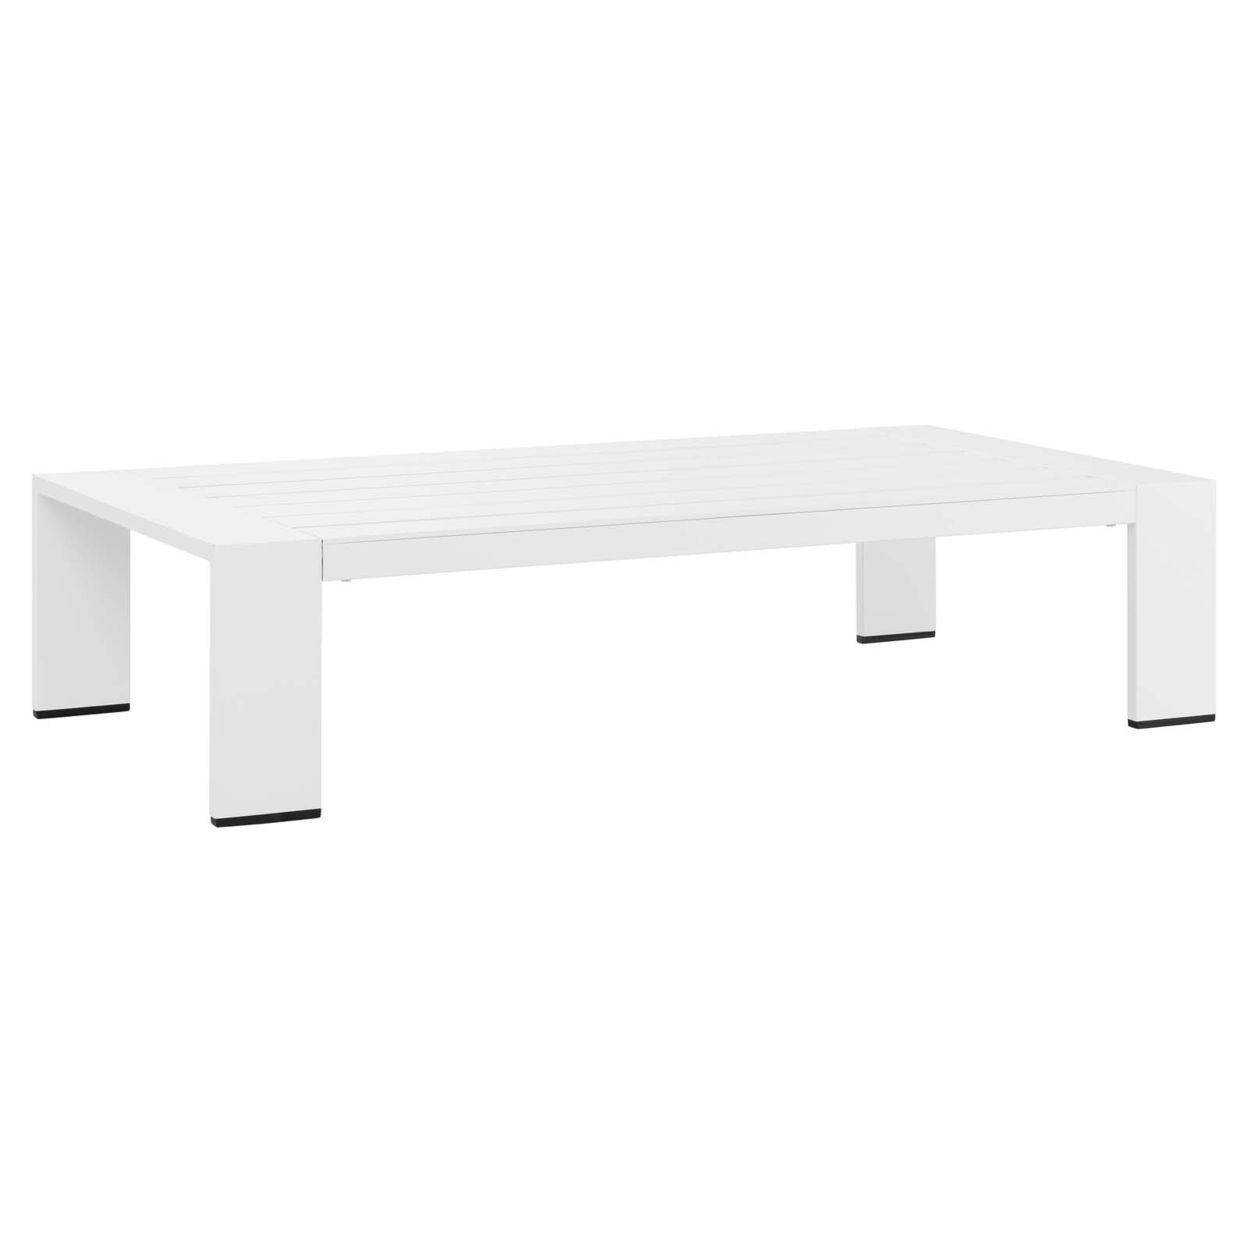 Tahoe Outdoor Patio Powder-Coated Aluminum Coffee Table, White